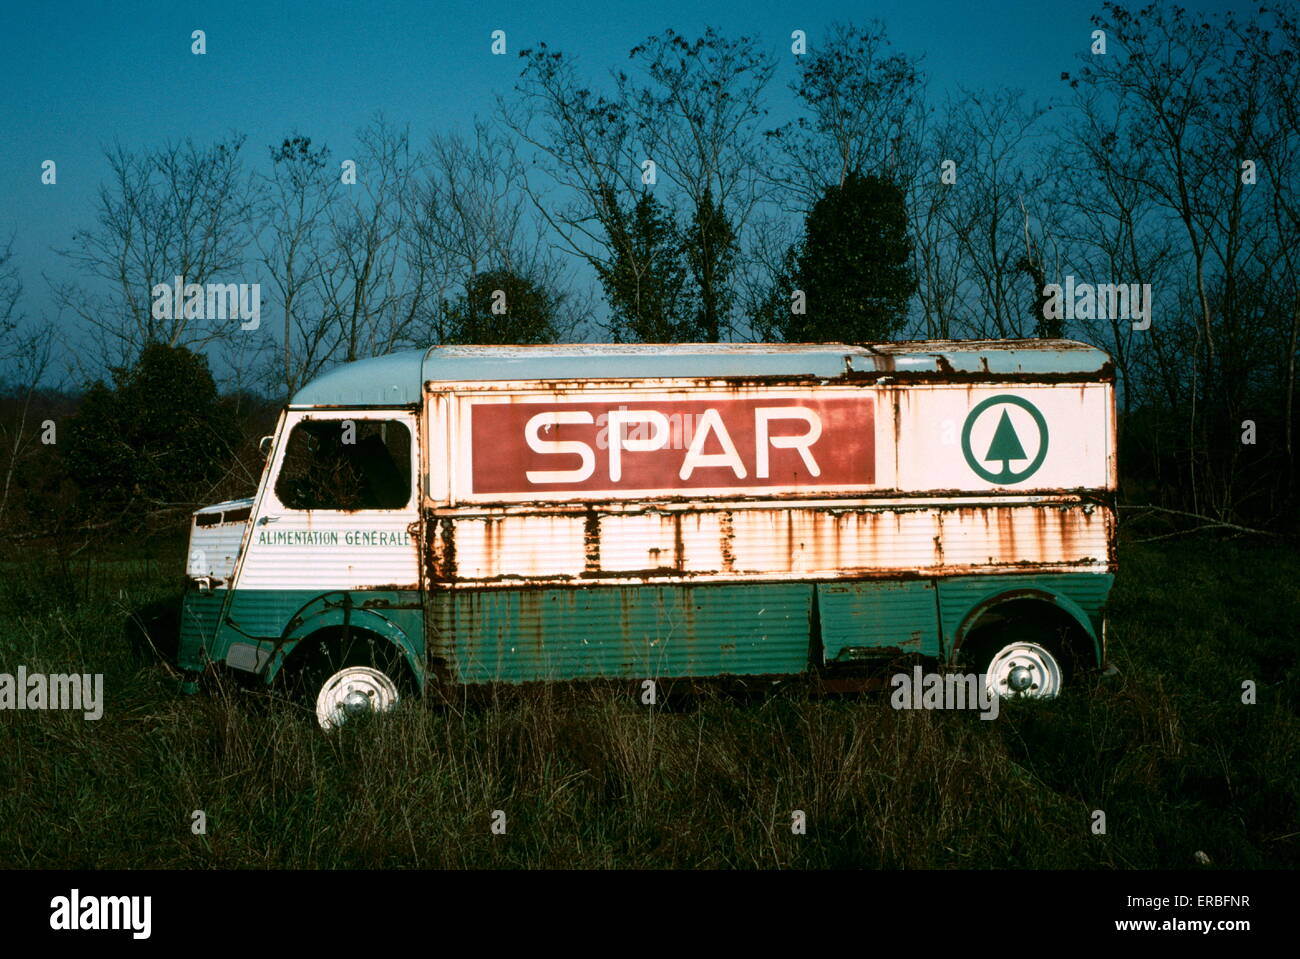 AJAXNETPHOTO - 1992. SOUTH WEST, FRANCE - FRENCH CAMIONETTE - CITROEN H VAN ADVERTISING SUPERMARKET BRAND ABANDONED IN COUNTRYSIDE. PHOTO:JONATHAN EASTLAND/AJAX. REF:920095 14 Stock Photo